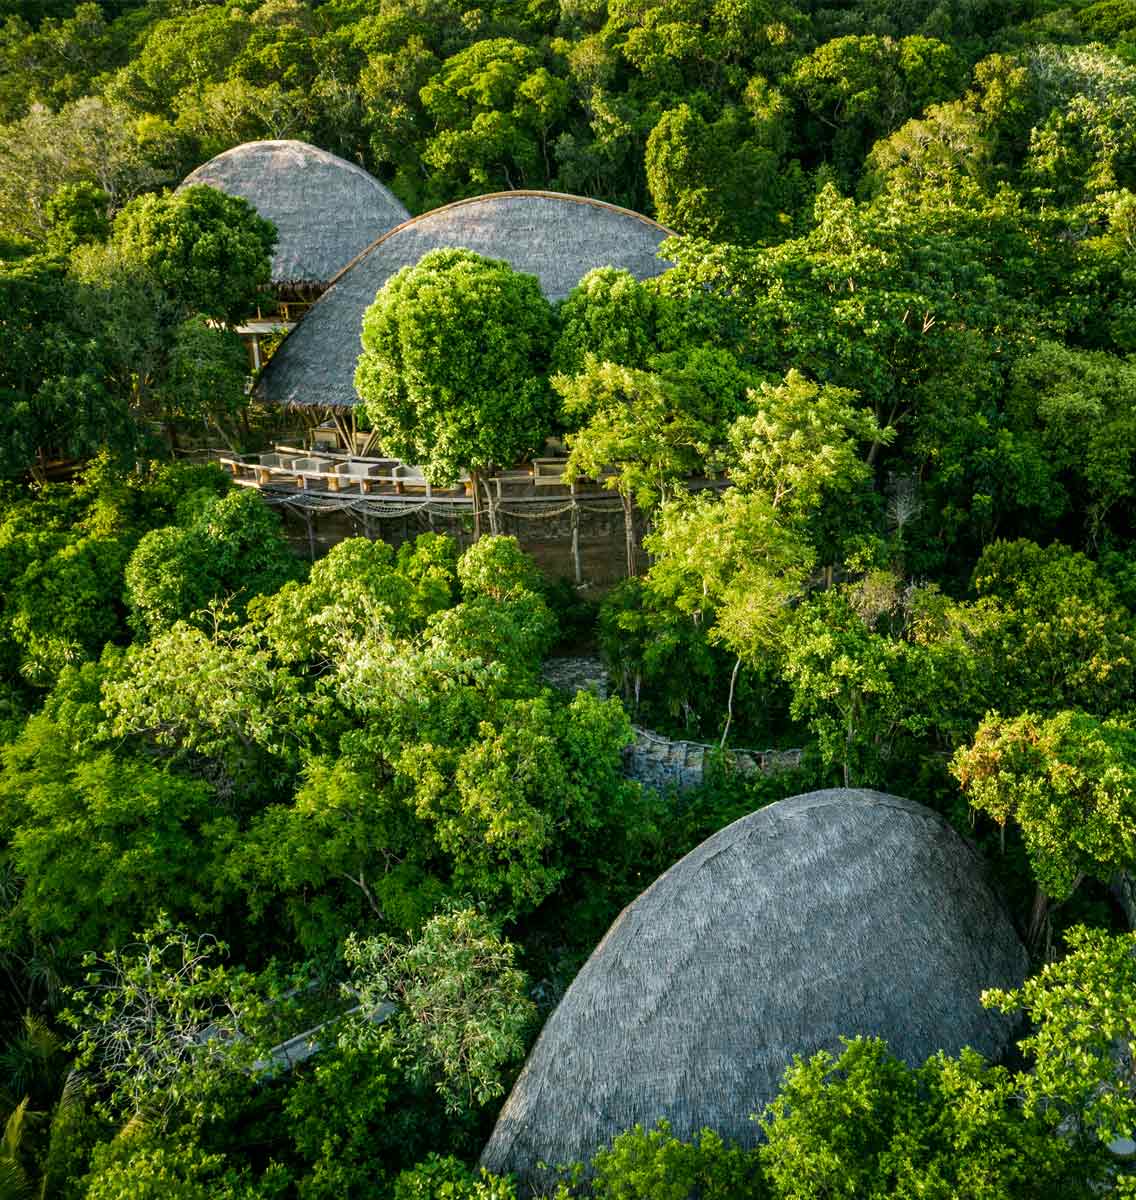 Bawah Reserve, Indonesia. Jules Verne bar, Treetops hotel restaurant and the Grouper bar amongst the trees.